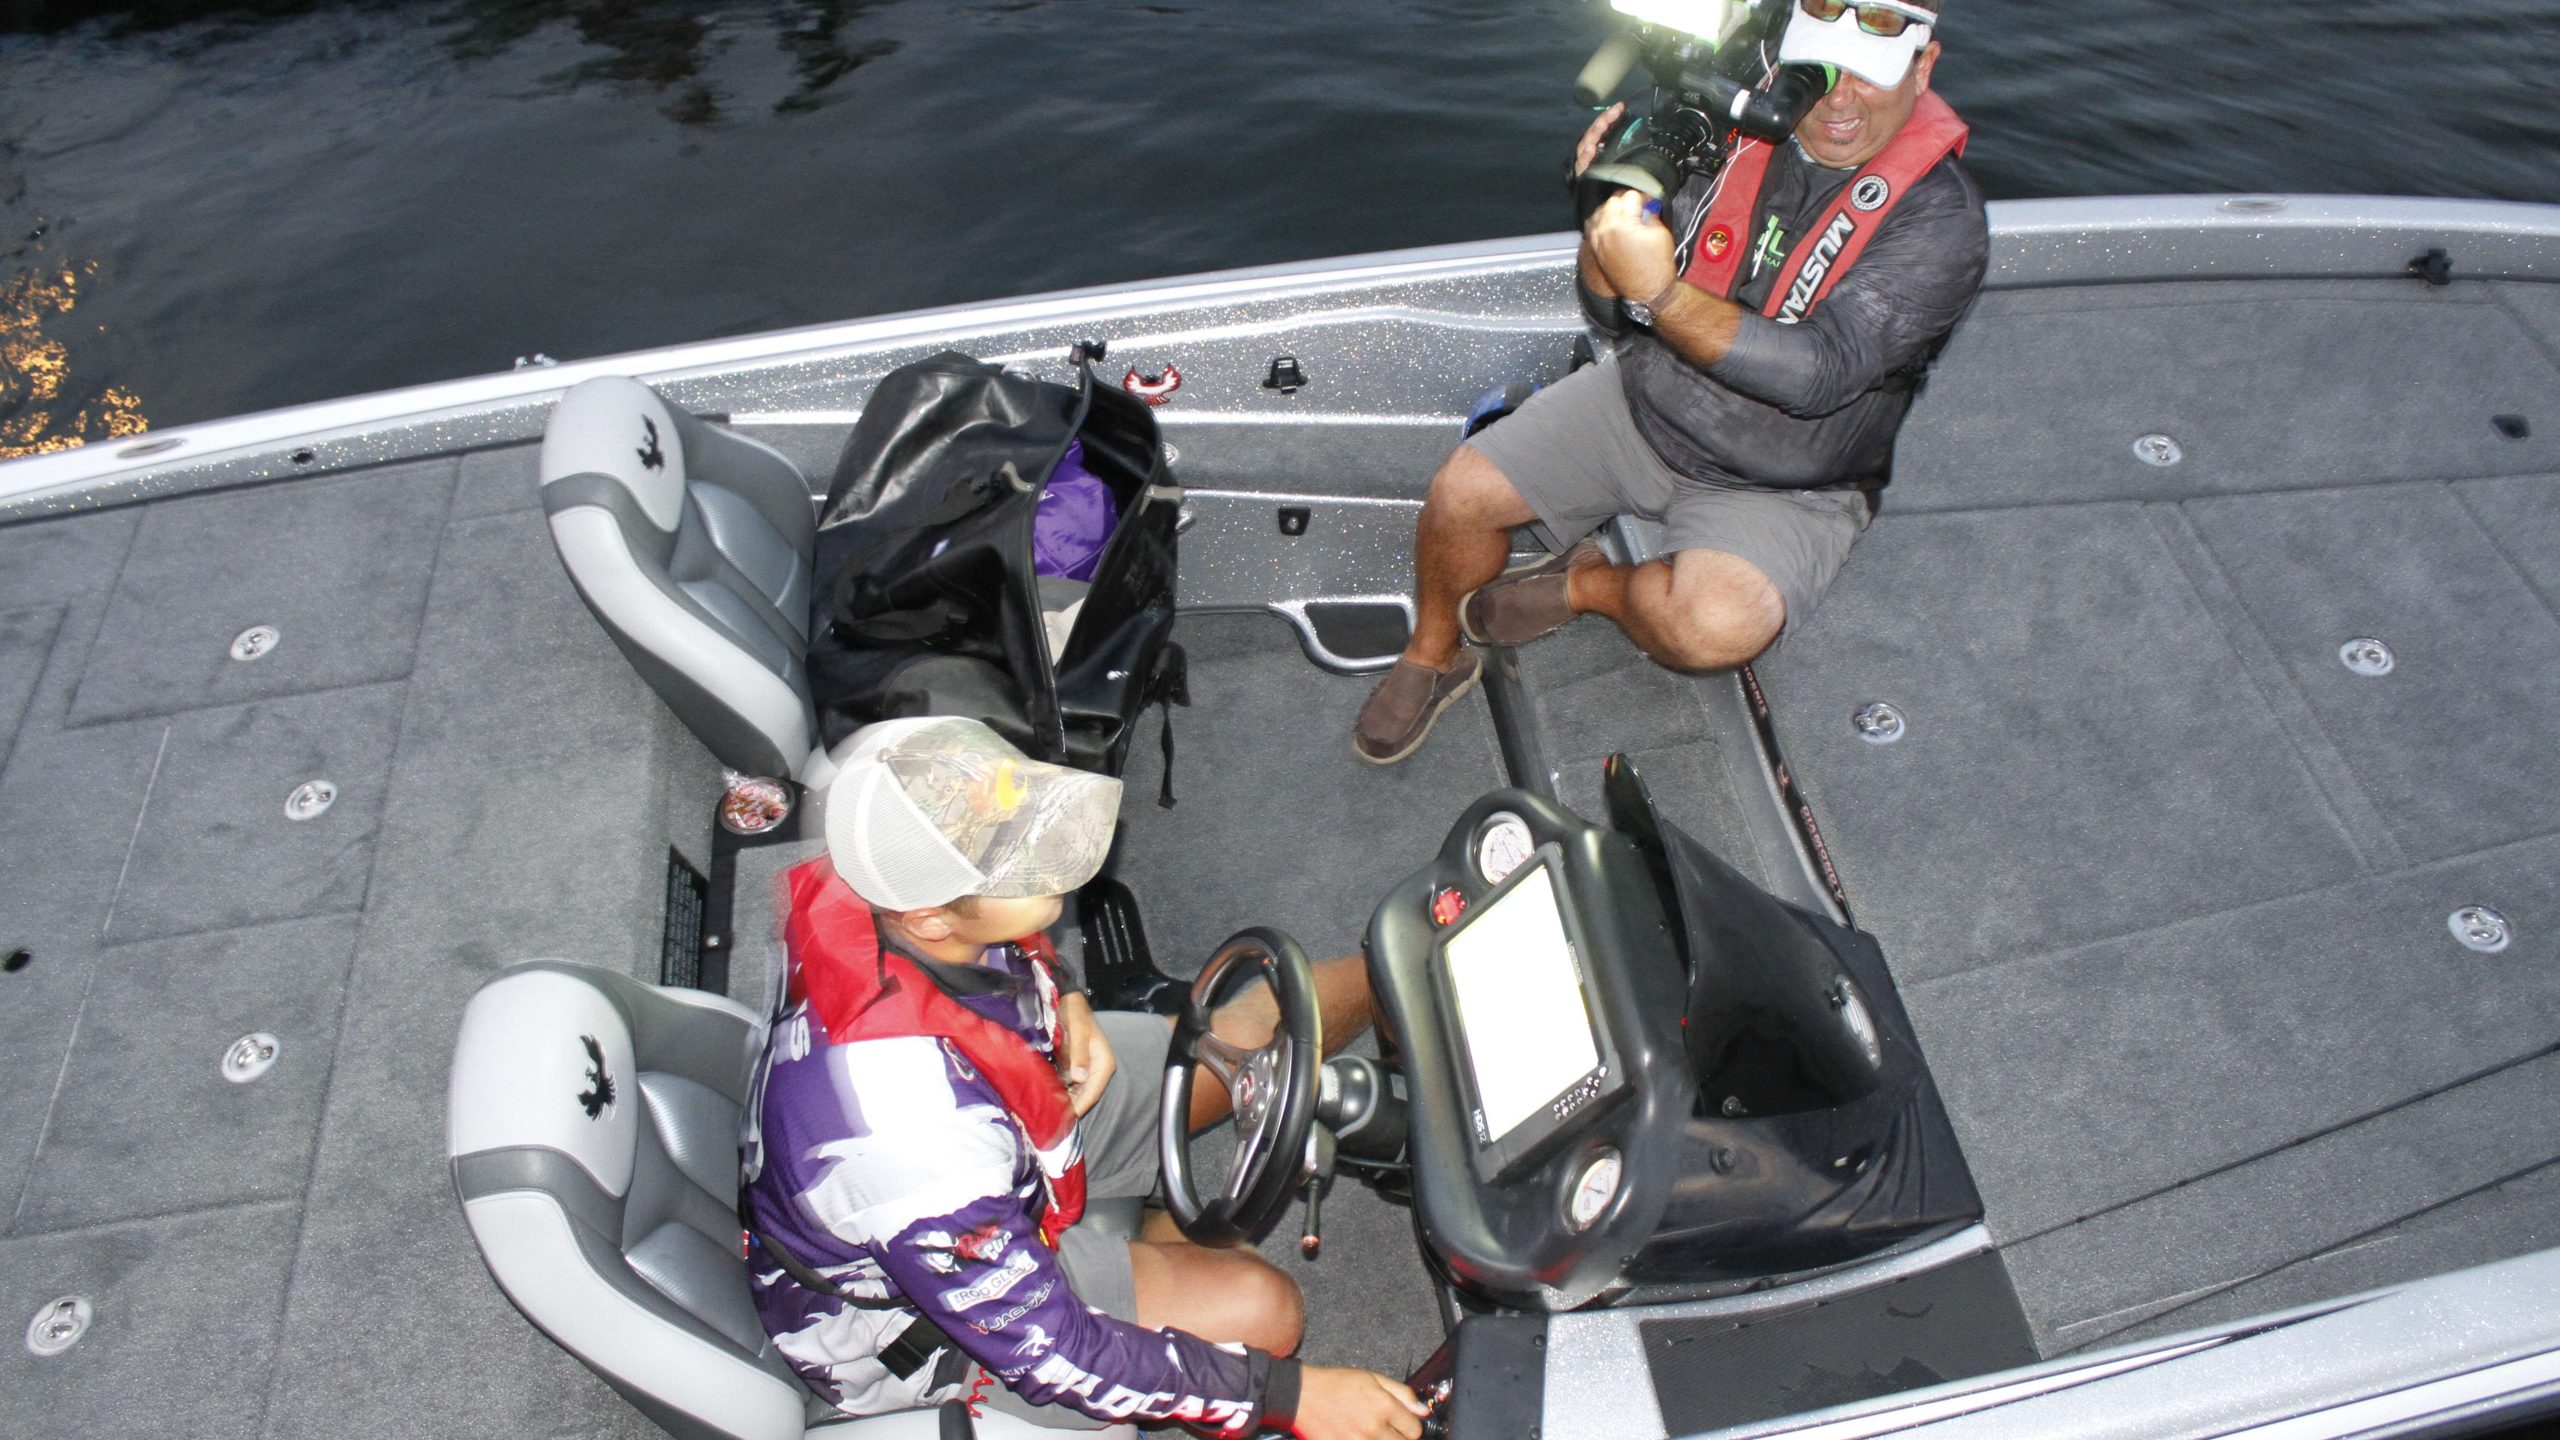 The top college anglers come cameras on their boats Thursday.